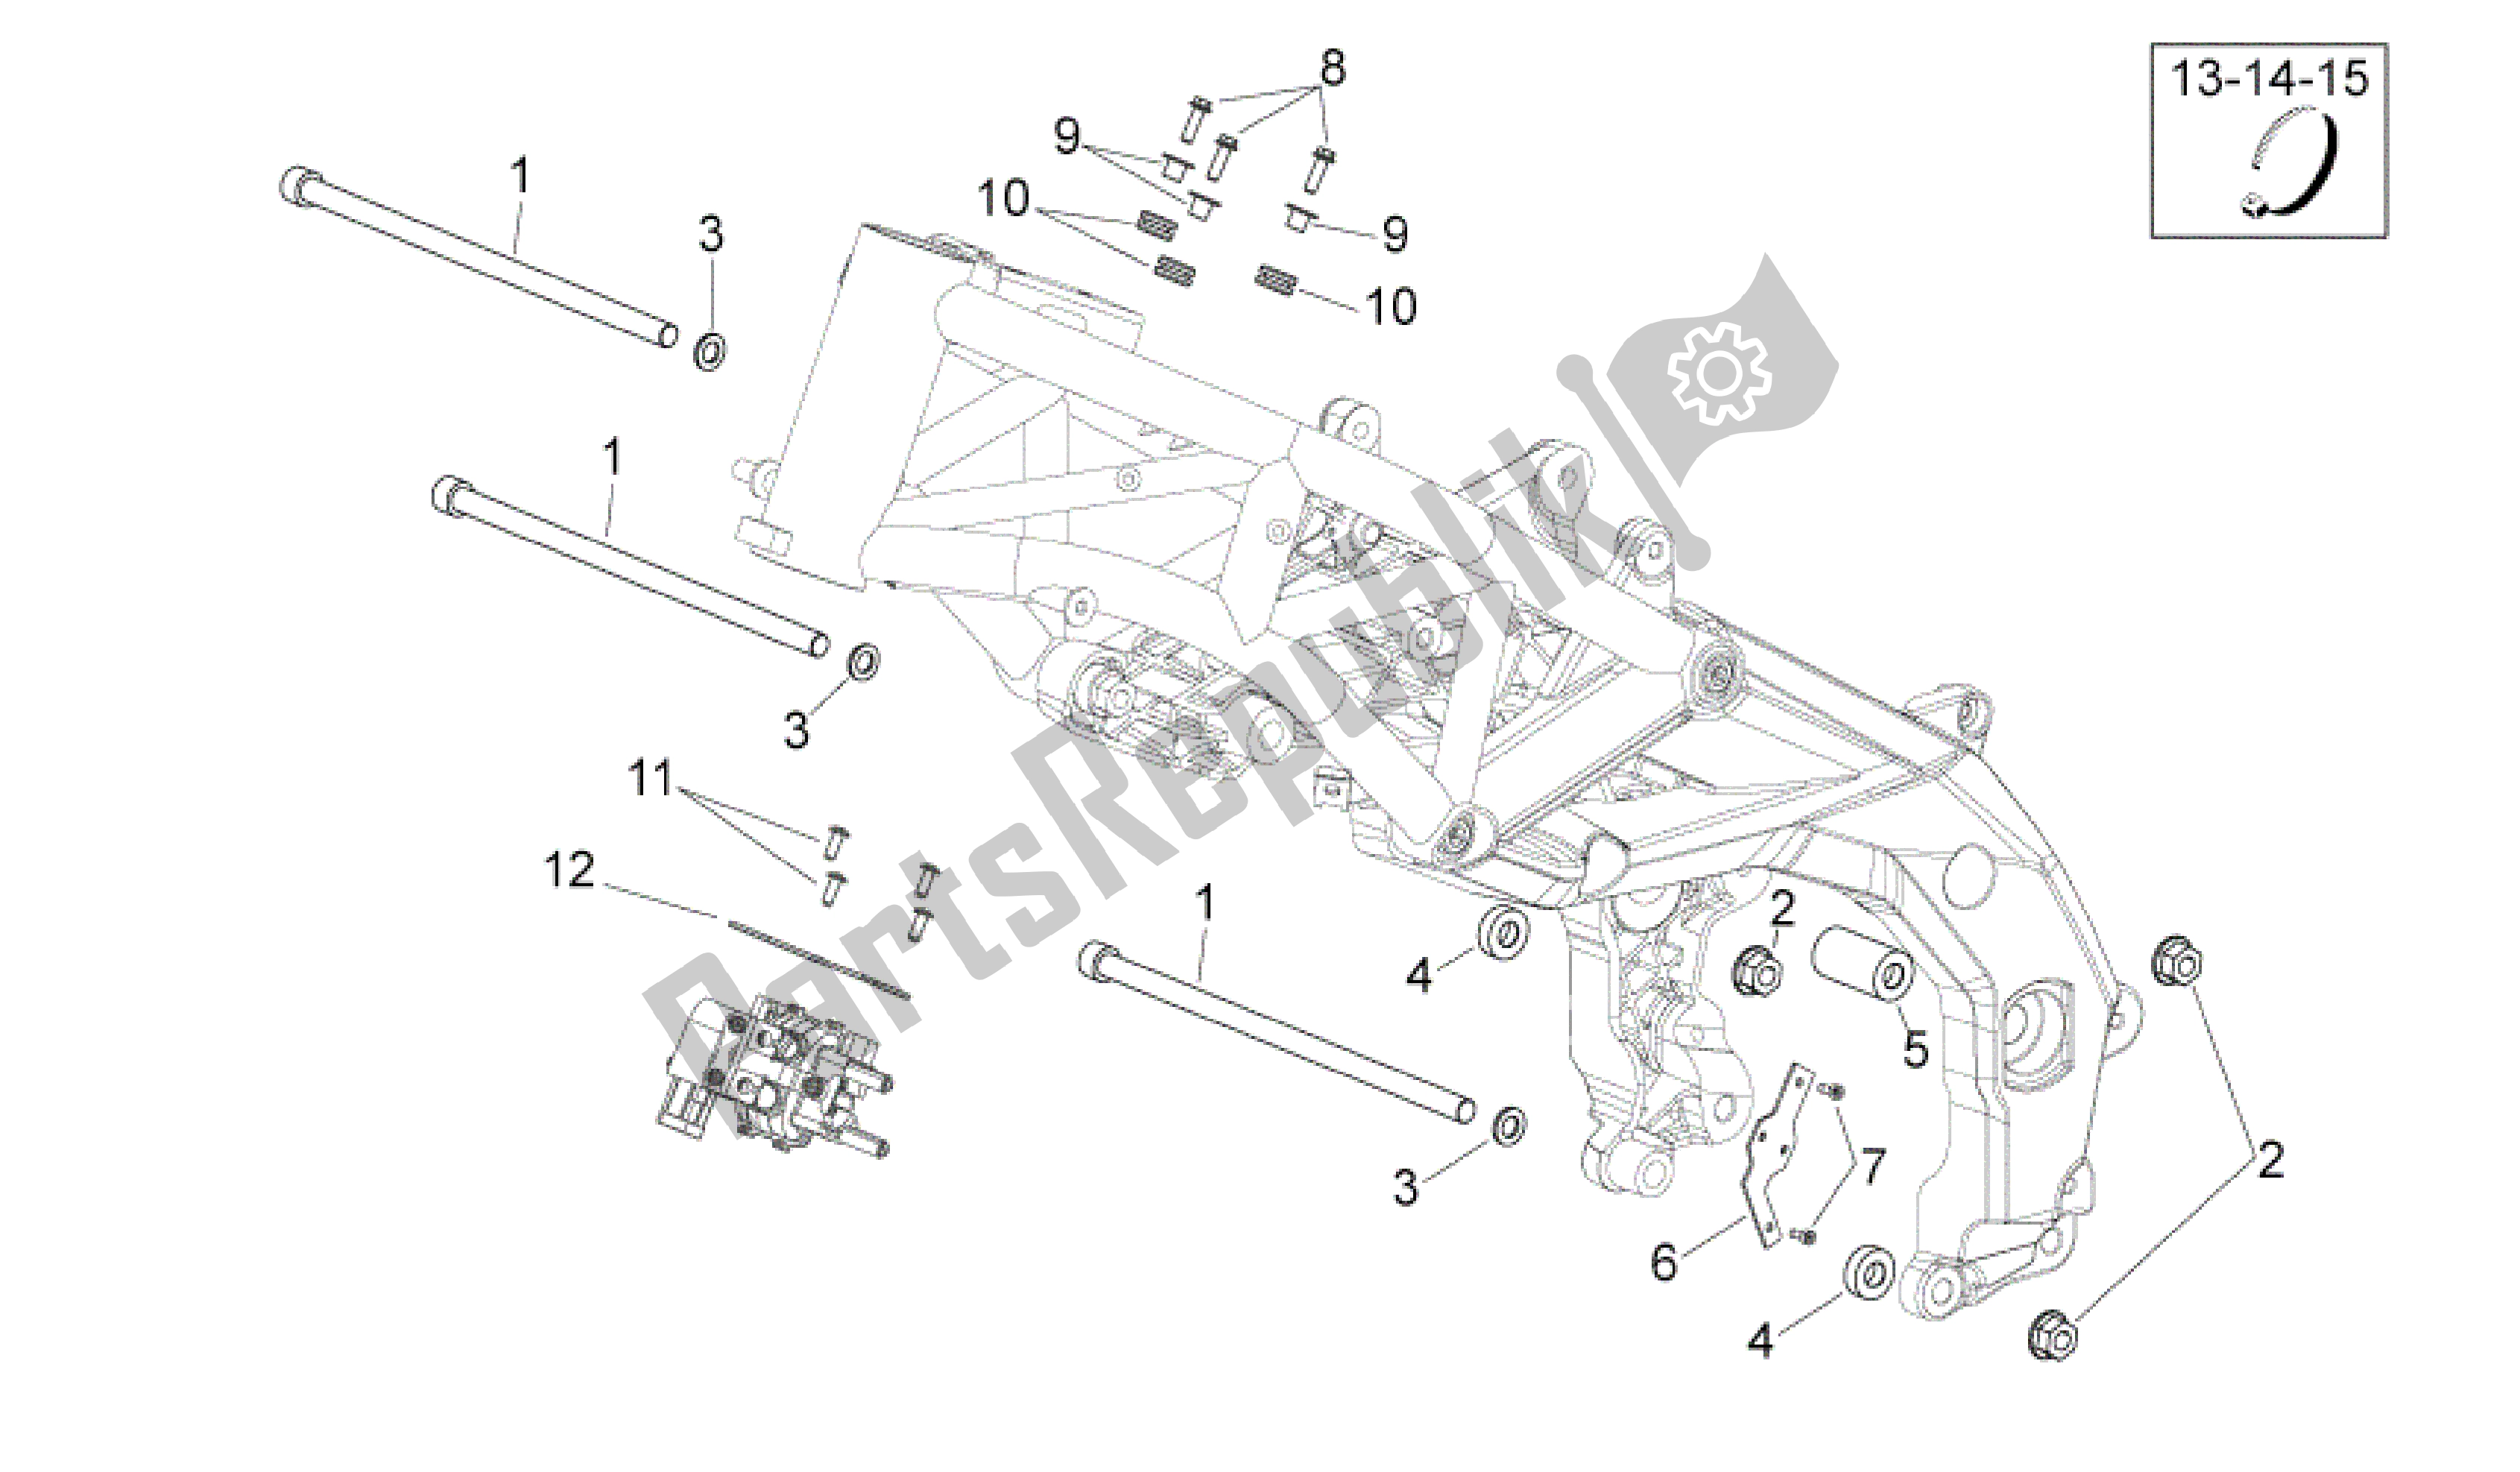 All parts for the Frame Ii of the Aprilia Shiver 750 2007 - 2009